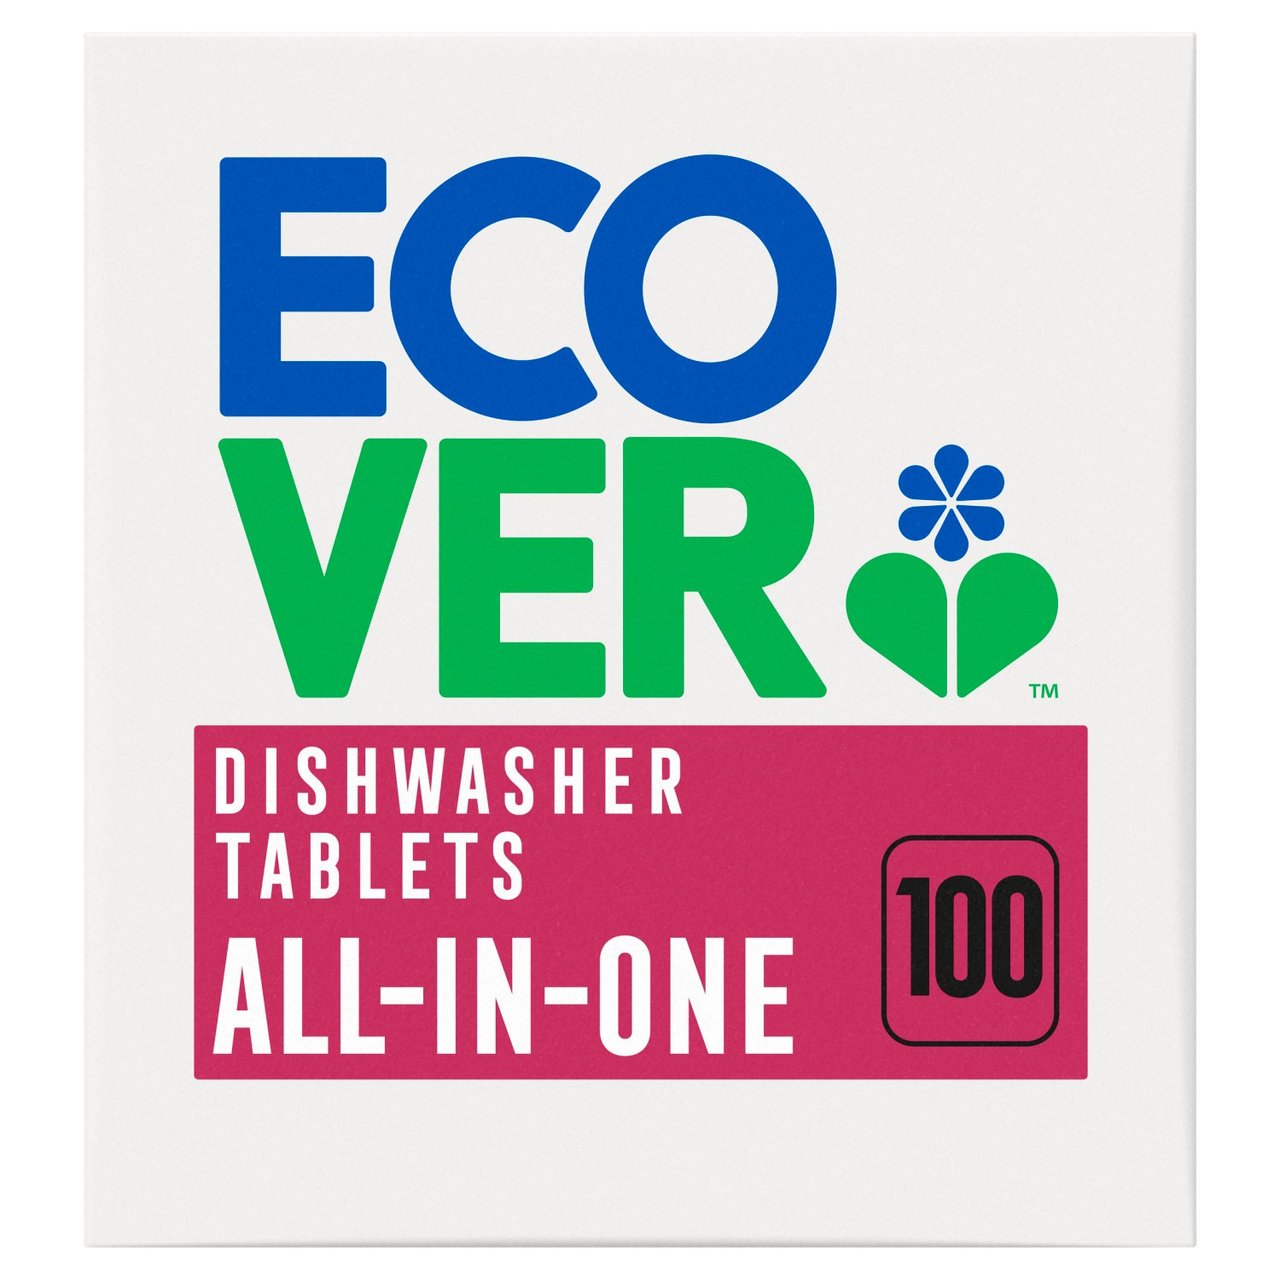 Ultimate Plus All in 1 Dishwasher Tablets